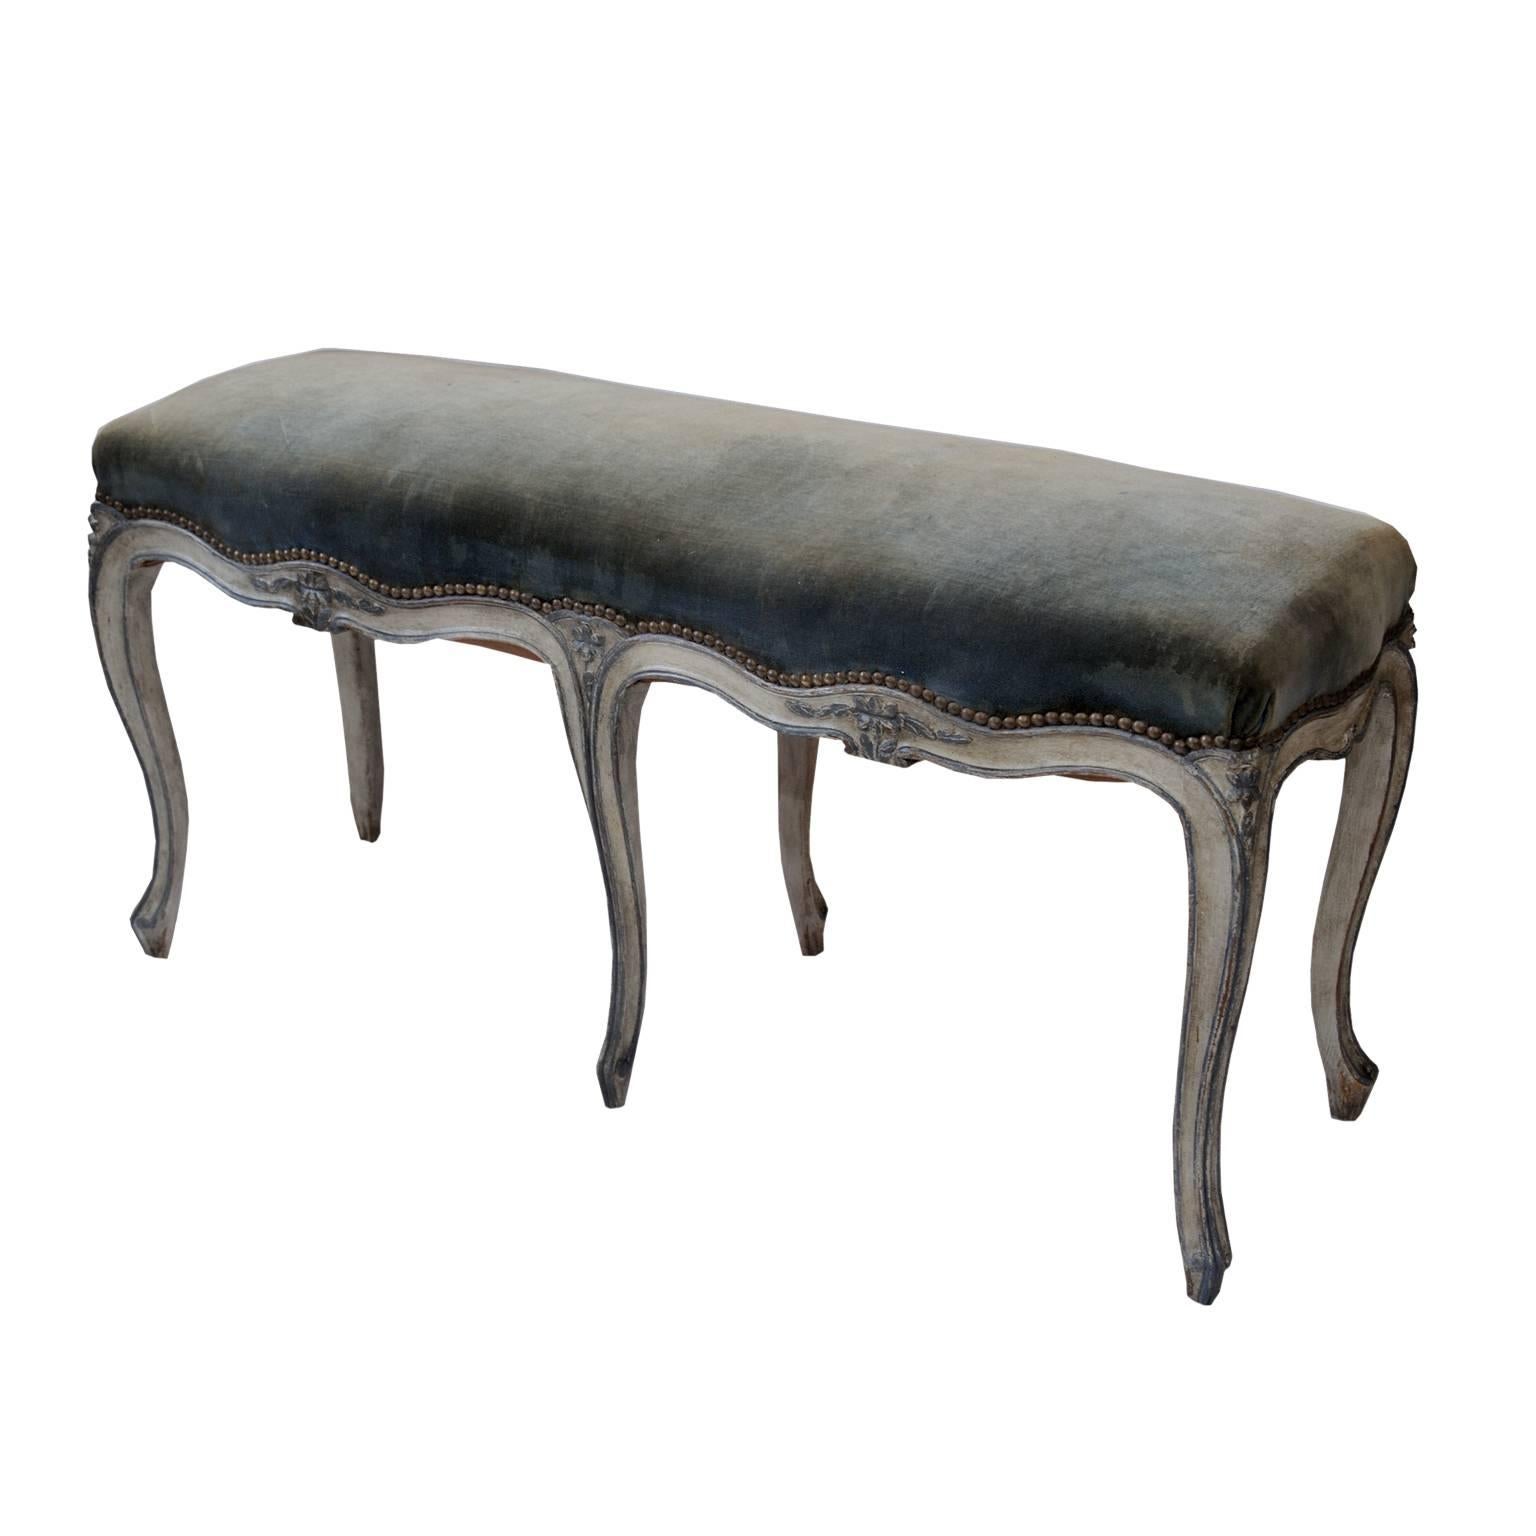 This is an extremely stylish late 19th century, Louis XV style painted window seat or long stool. This freestanding long stool is well proportioned, sits on six beautifully finished cabriole legs, finished with very attractive detailing, circa 1880.